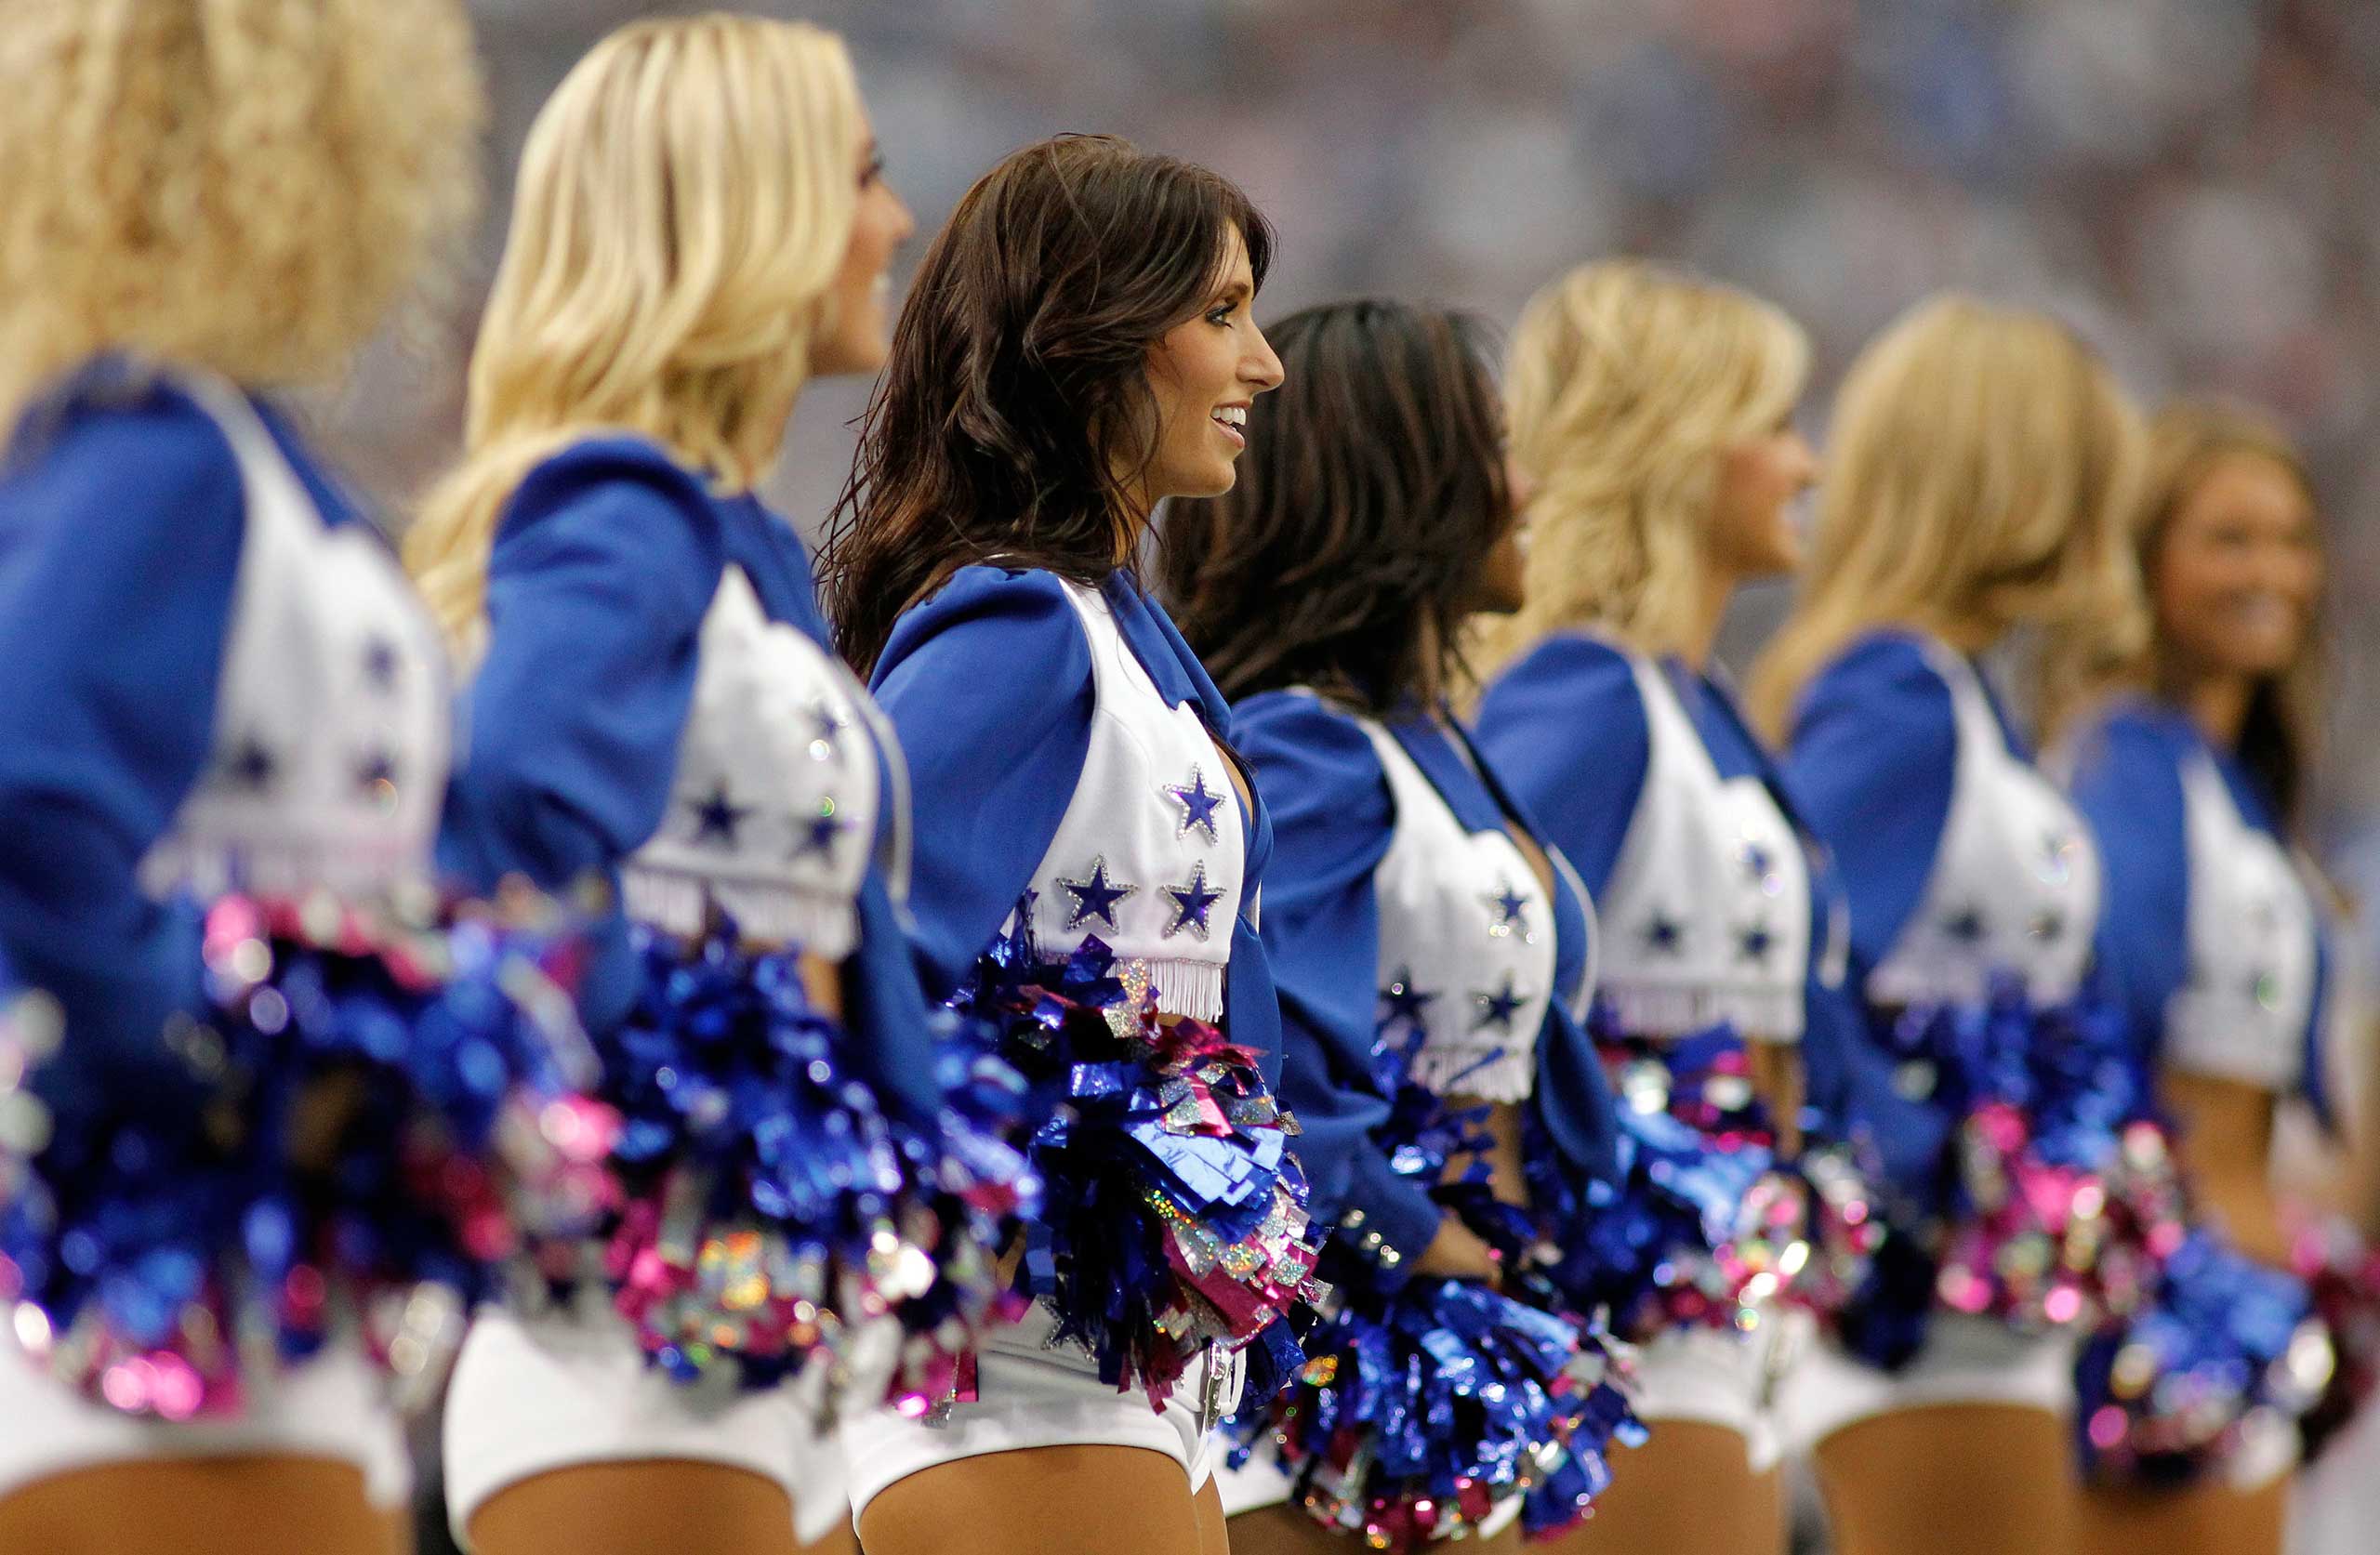 The Dallas Cowboys cheerleaders perform during the game between the Cowboys and Detroit Lions at Cowboys Stadium in Arlington, Texas. (Paul Moseley — MCT/Getty Images)